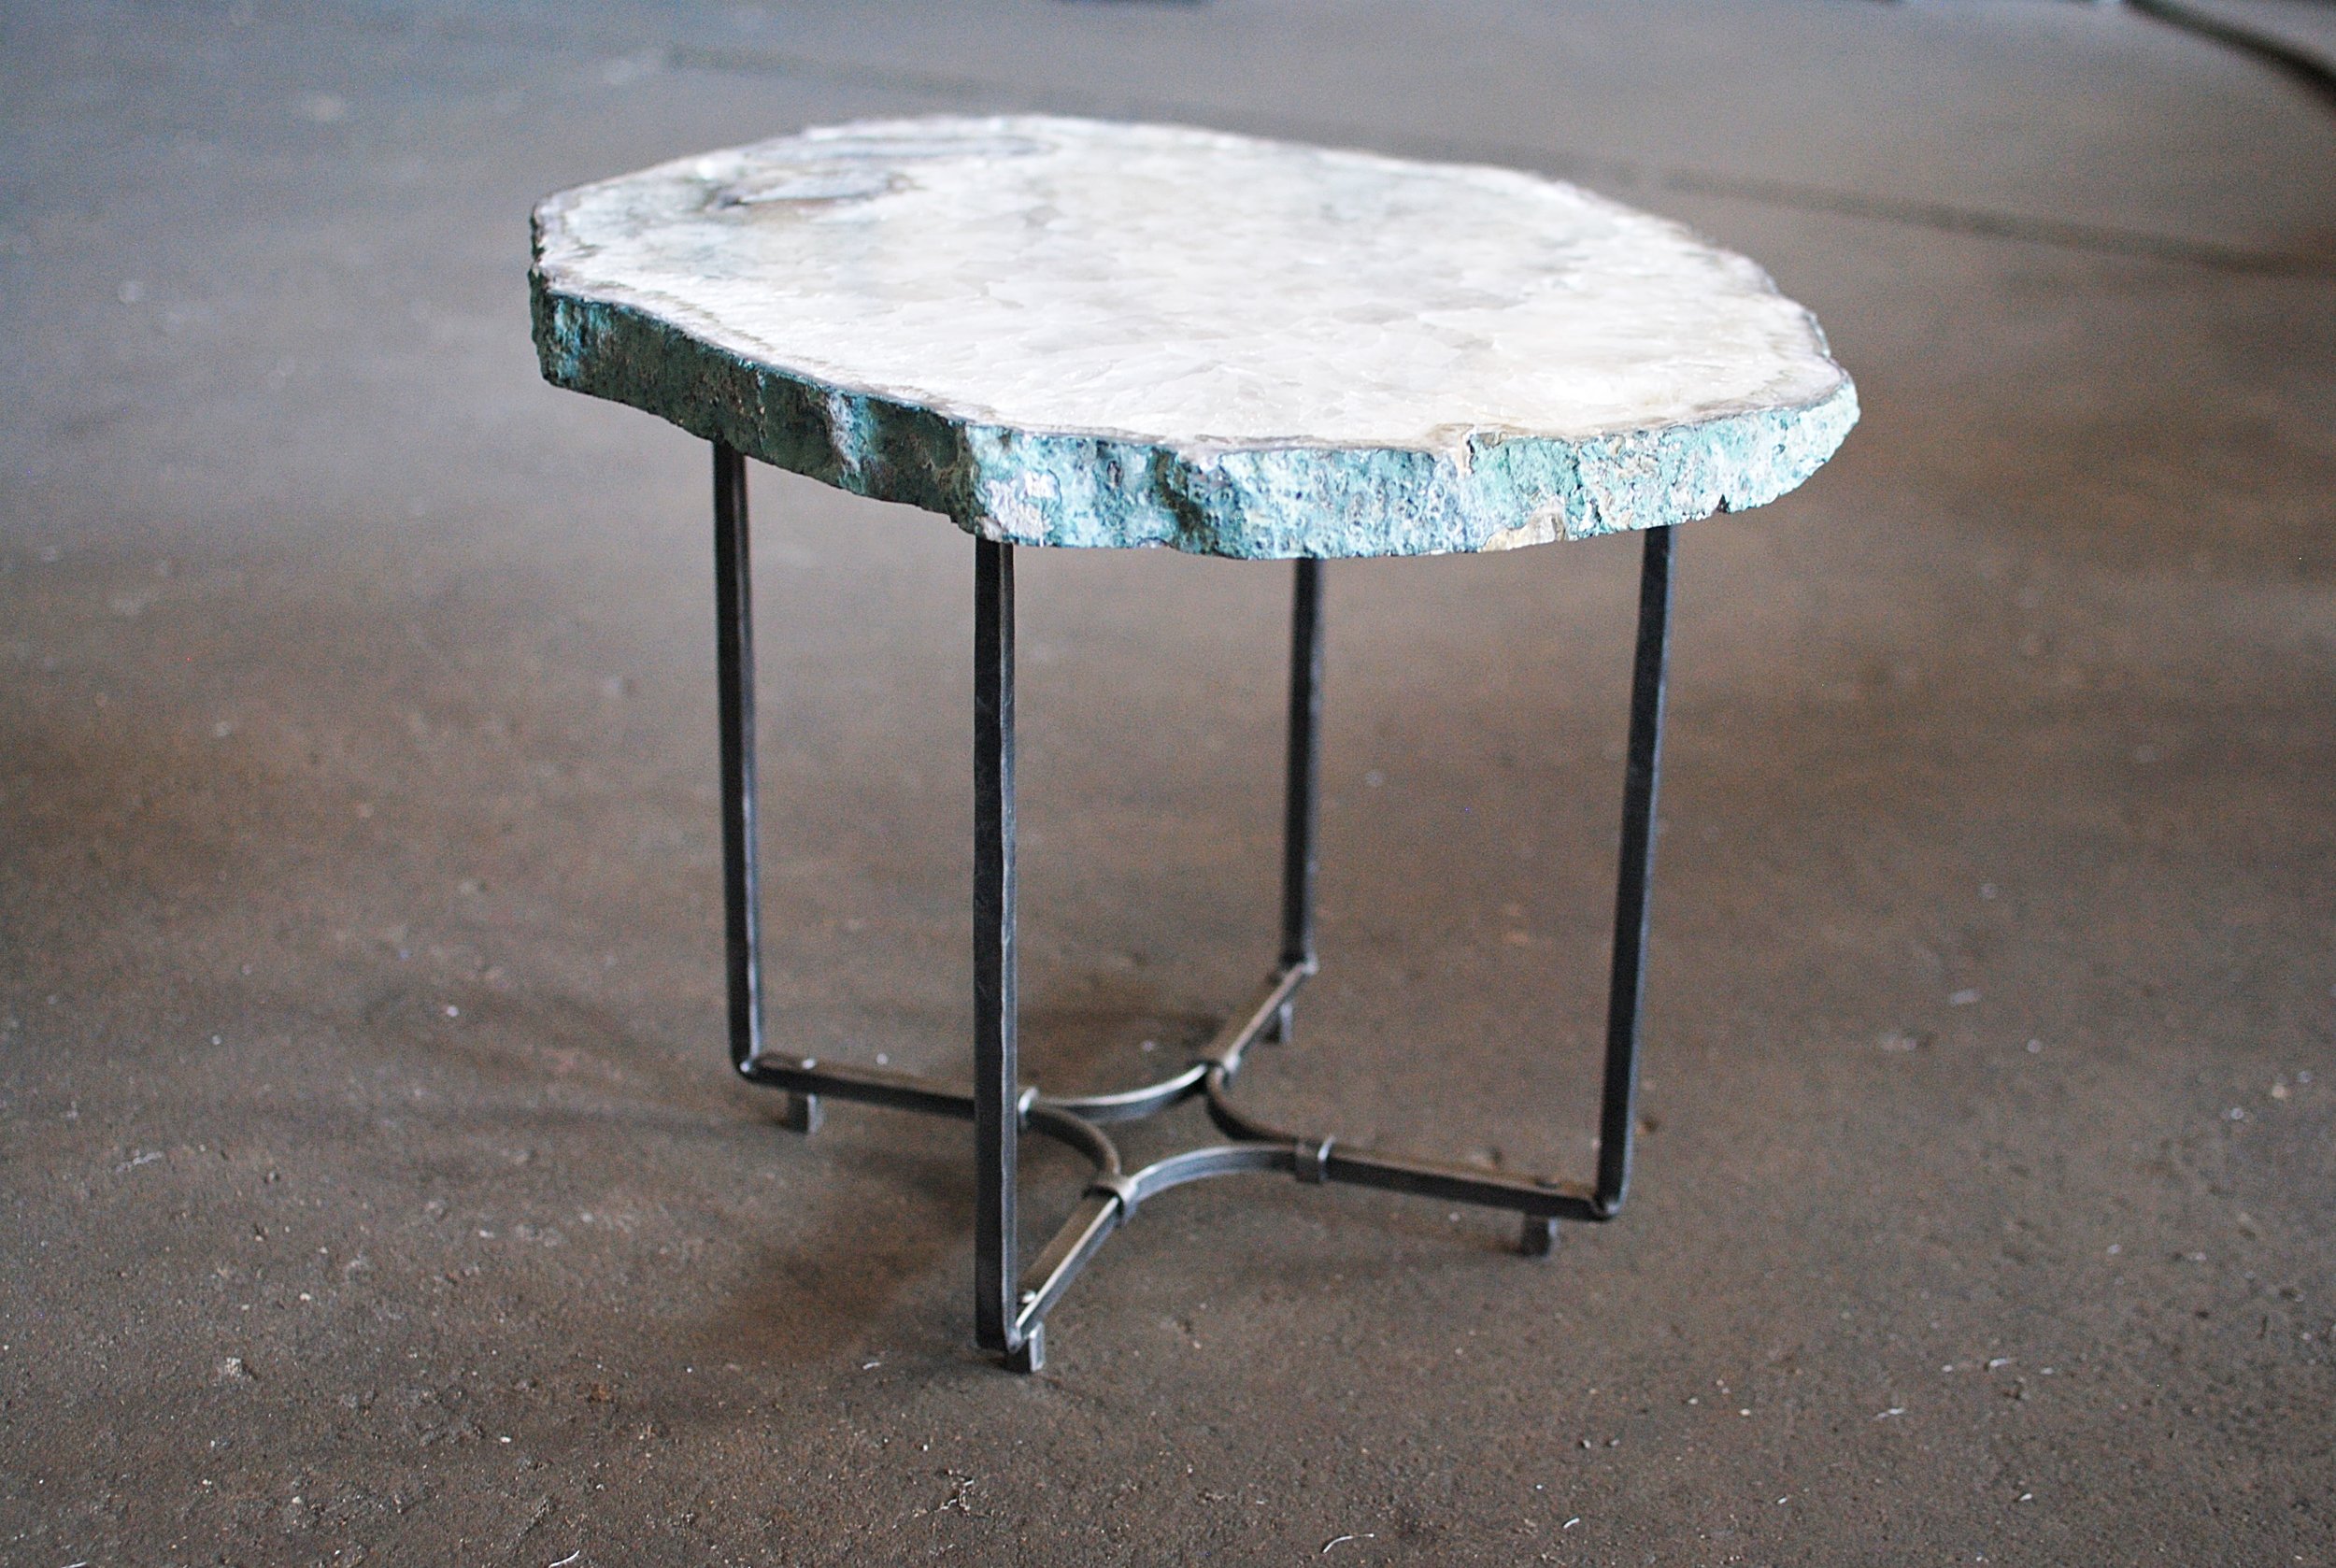 Custom steel table base with stone top